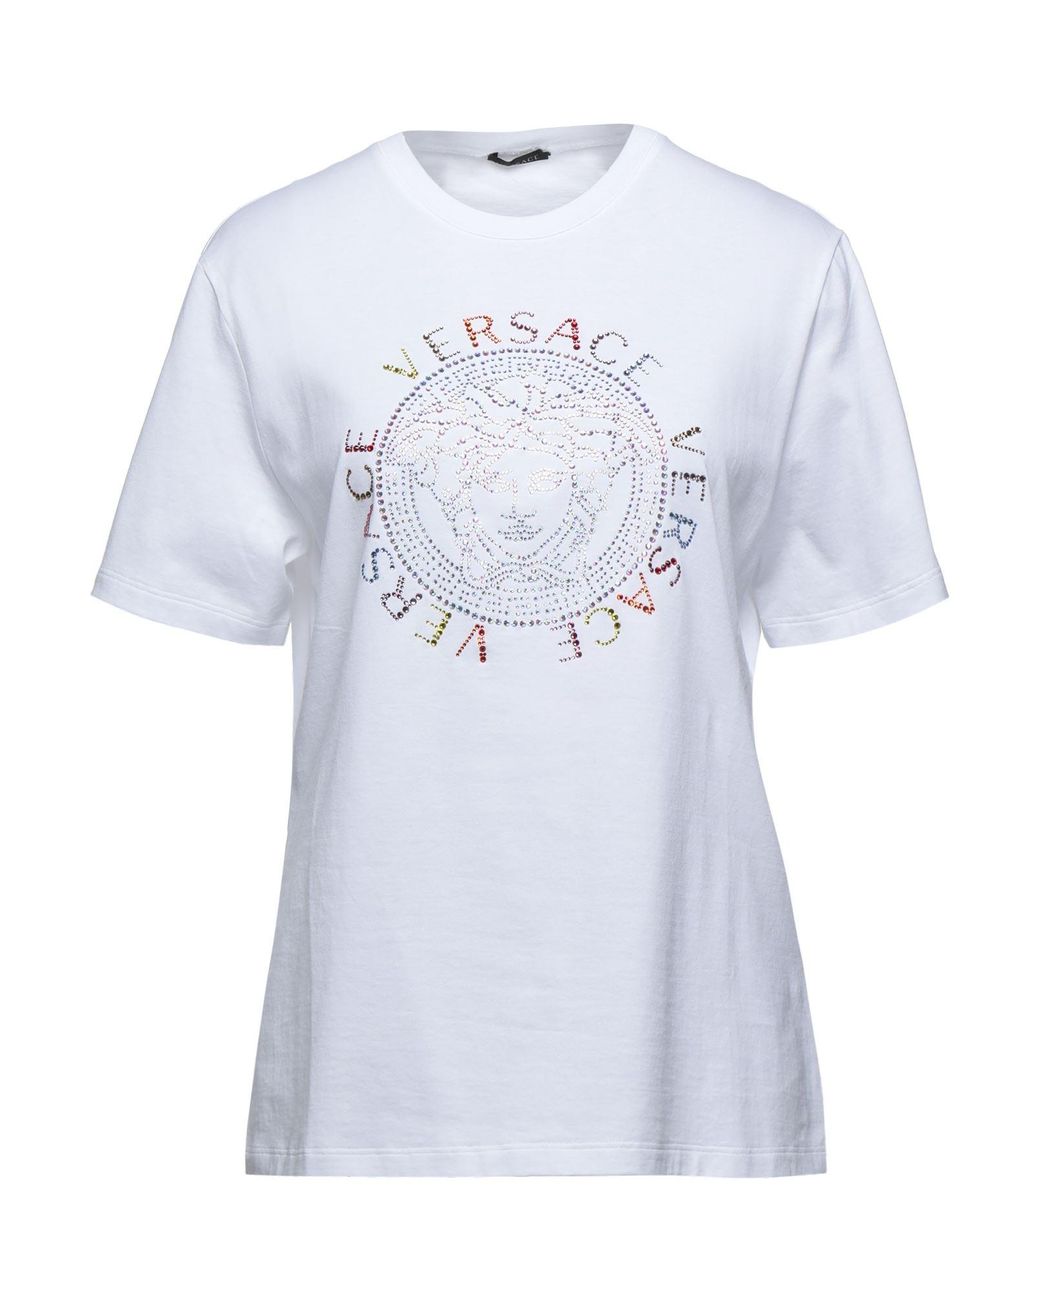 Versace T-shirt in White - Lyst